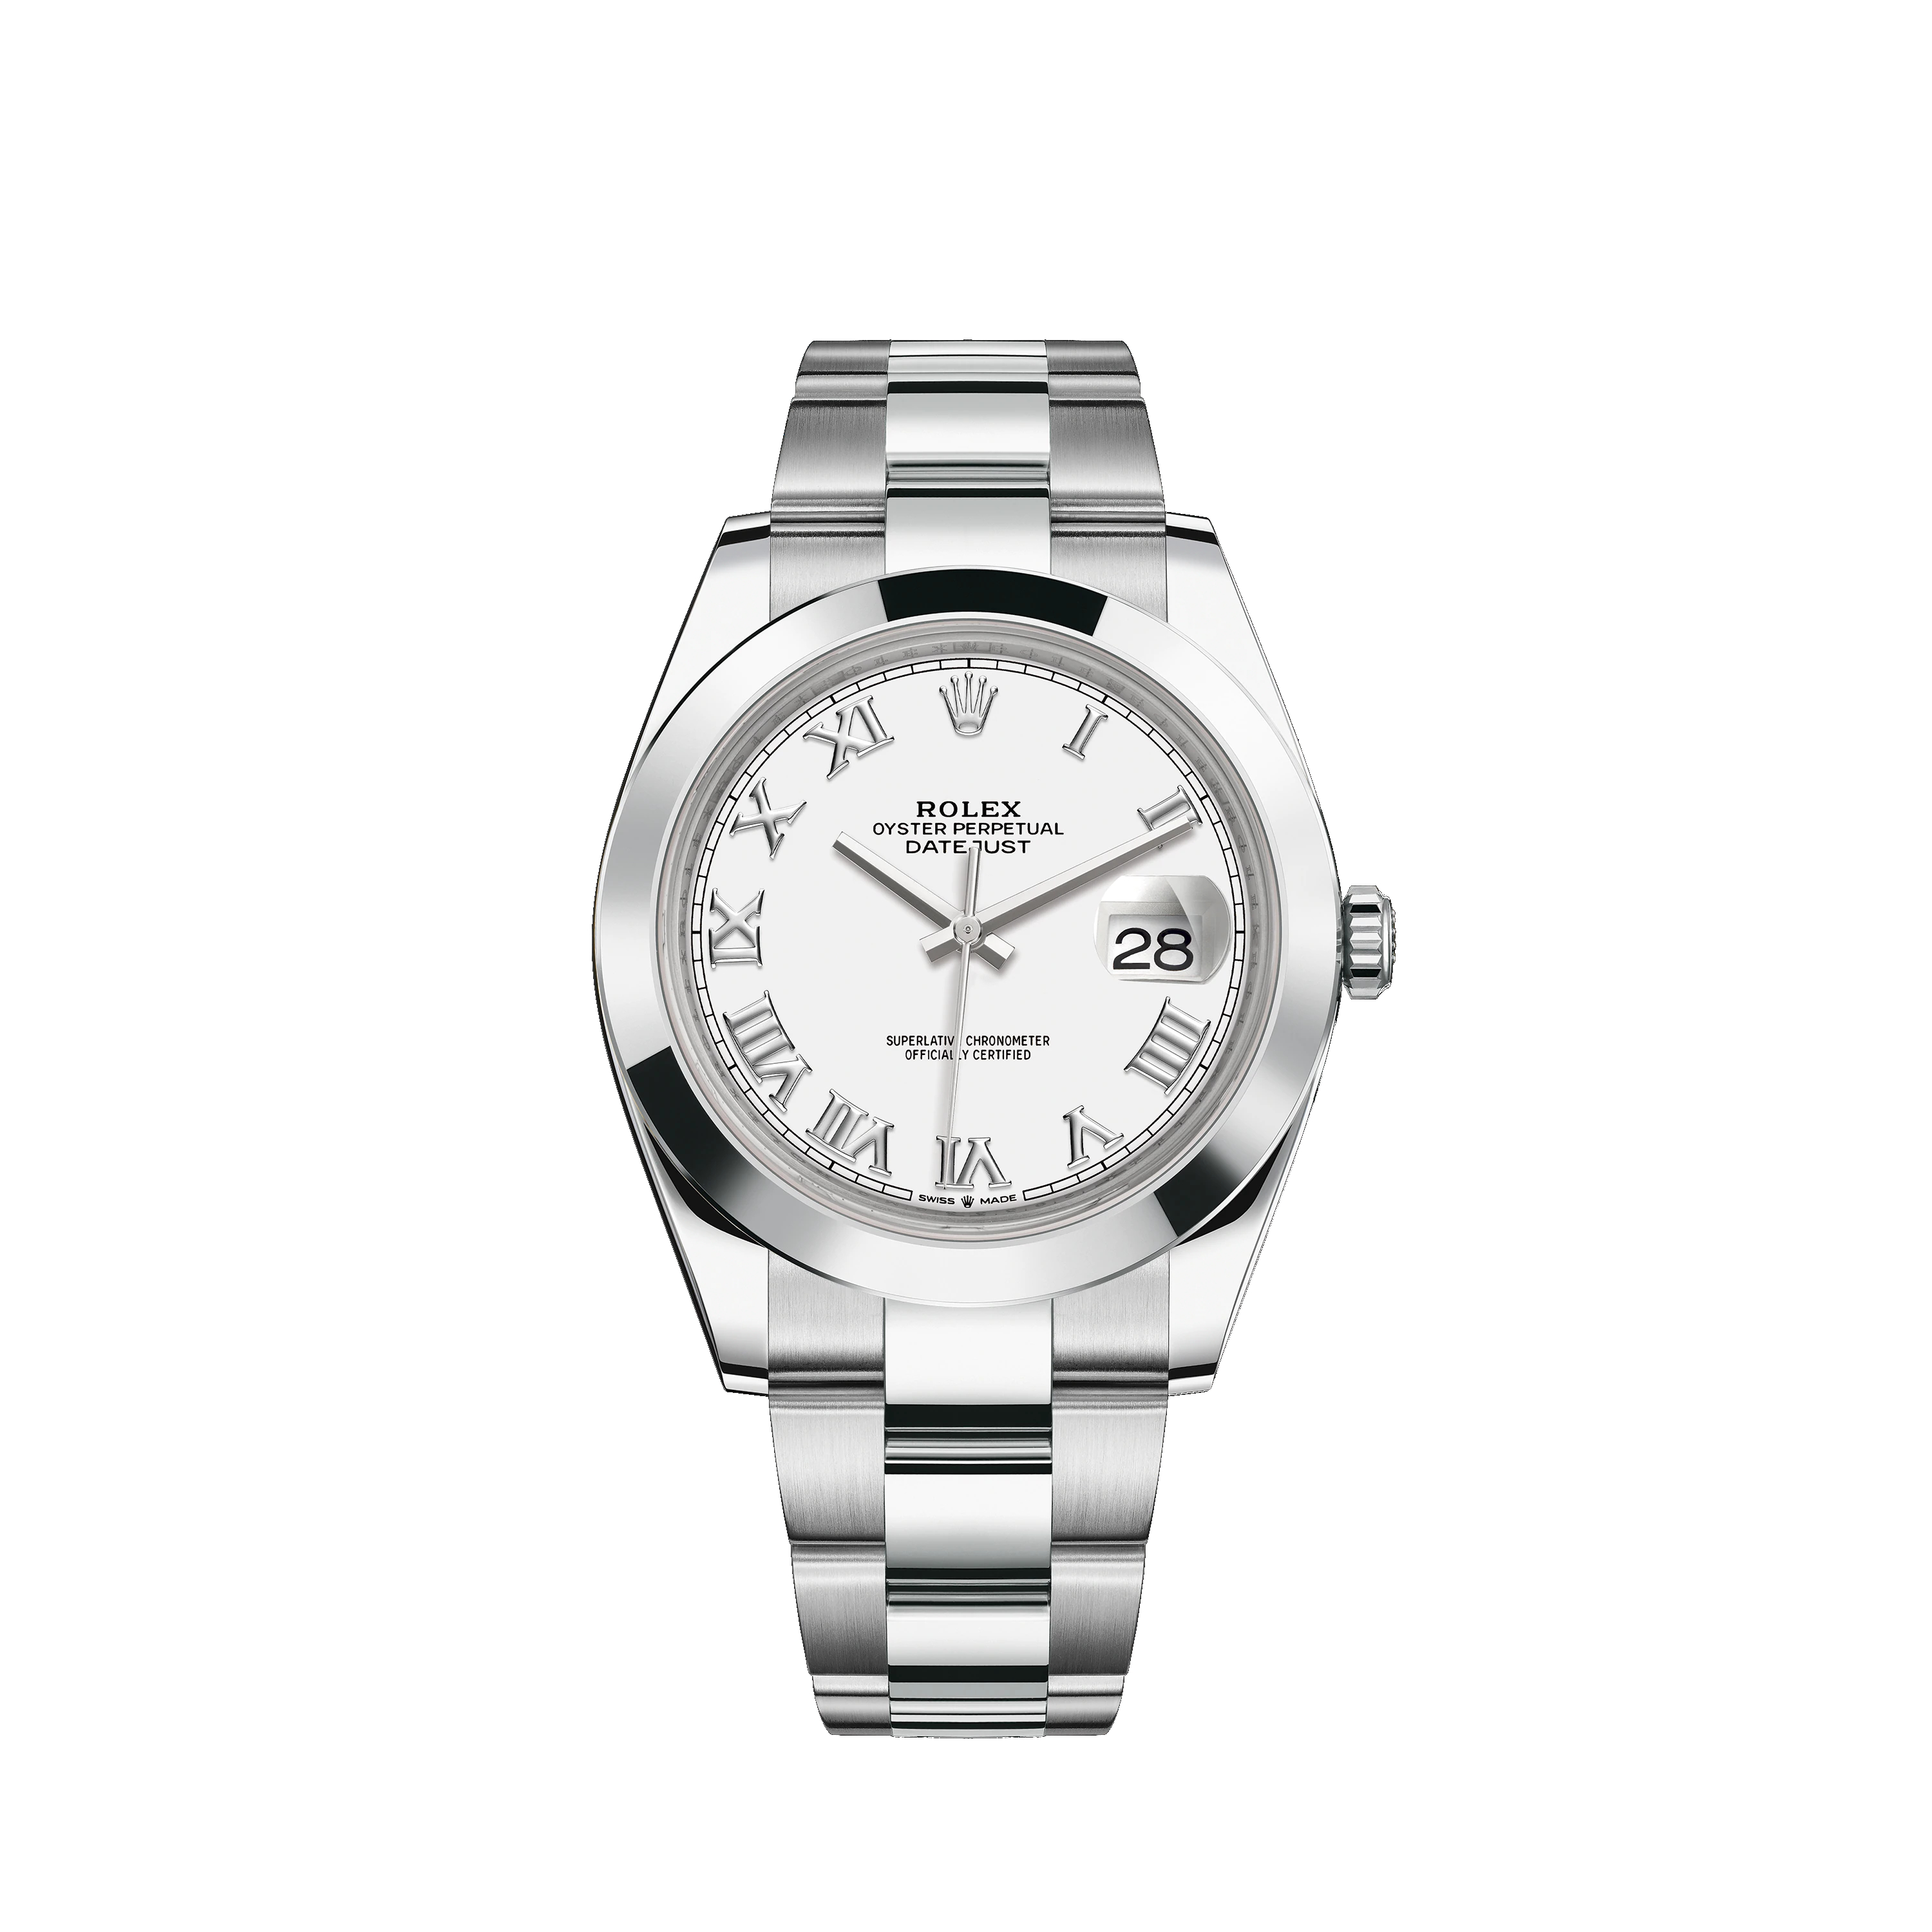 Datejust 41 126300 Stainless Steel Watch (White)